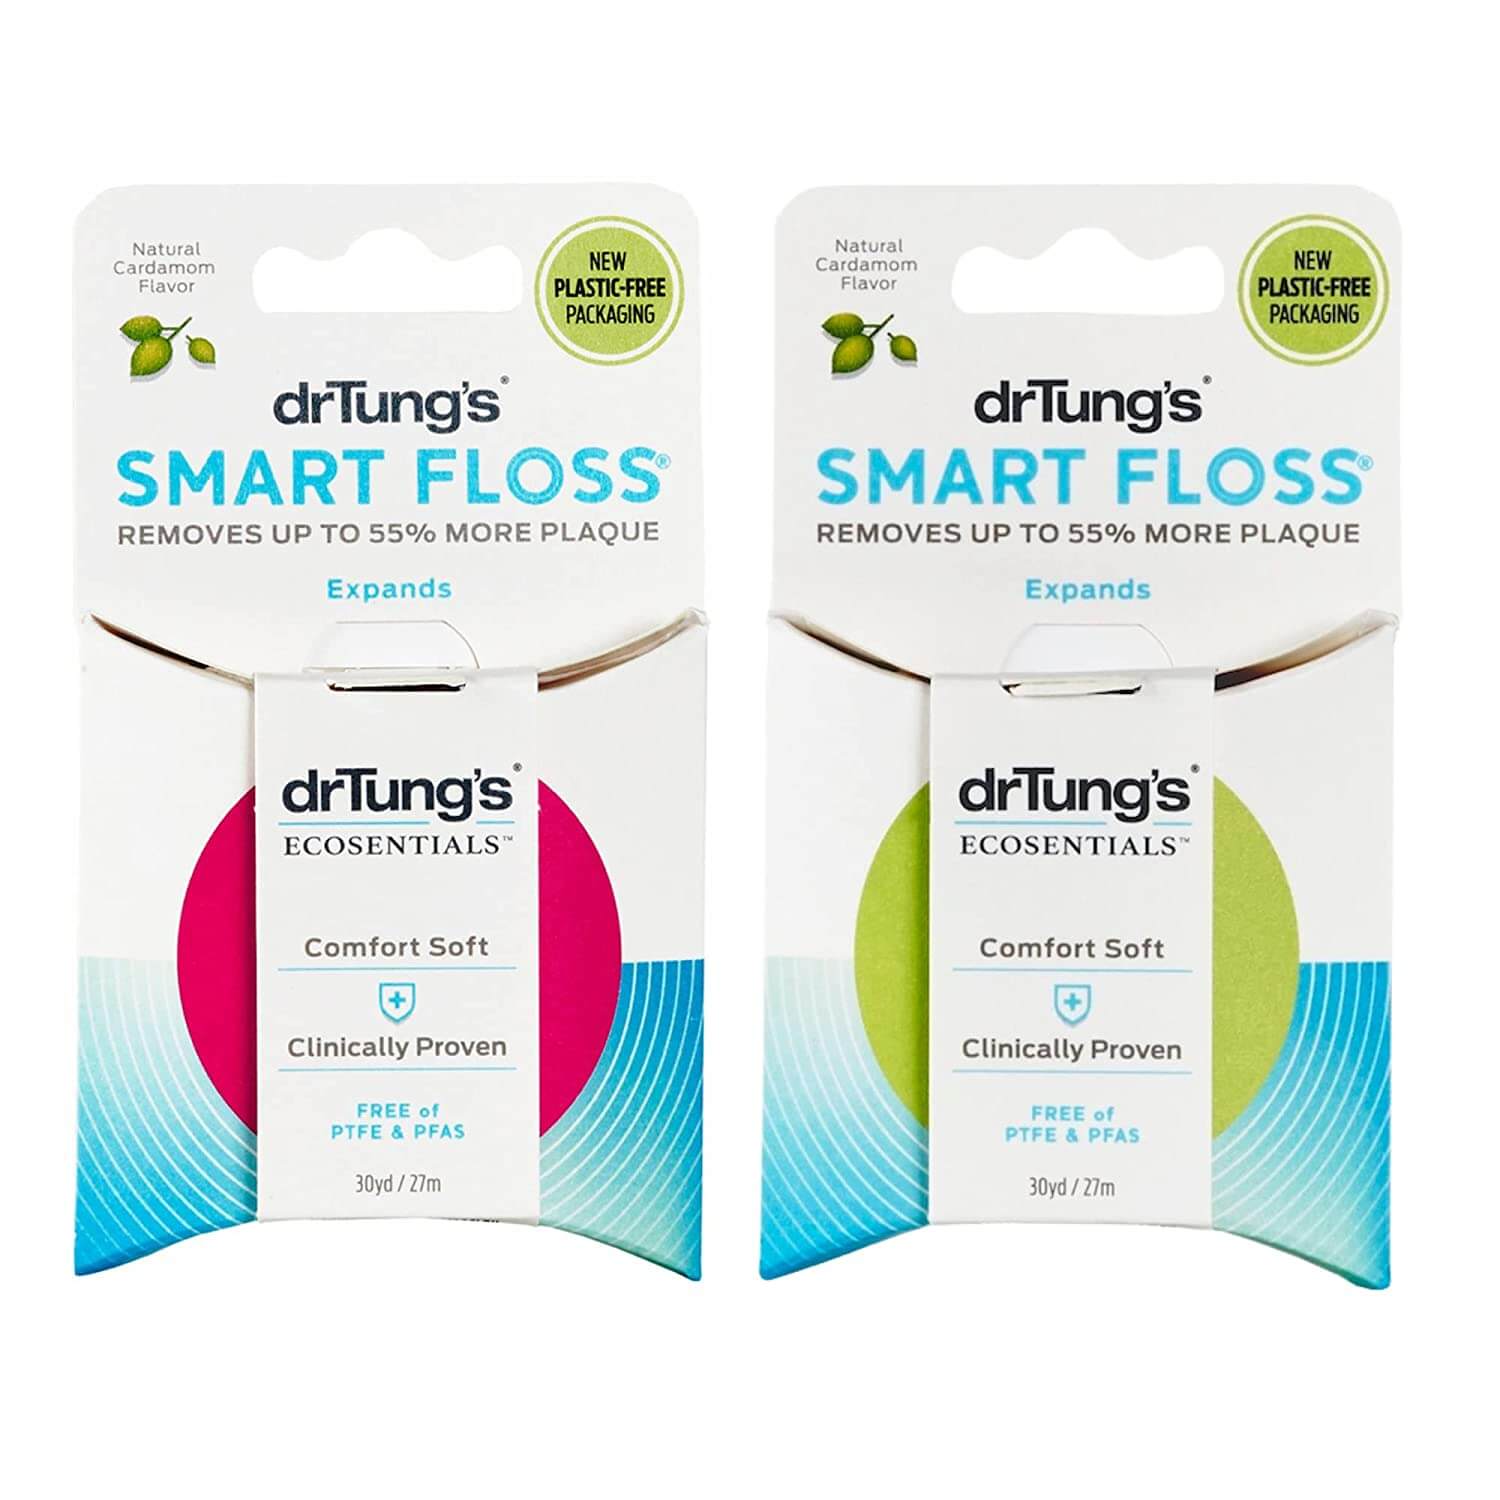 Dr. Tung's Smart Floss in Cardamom